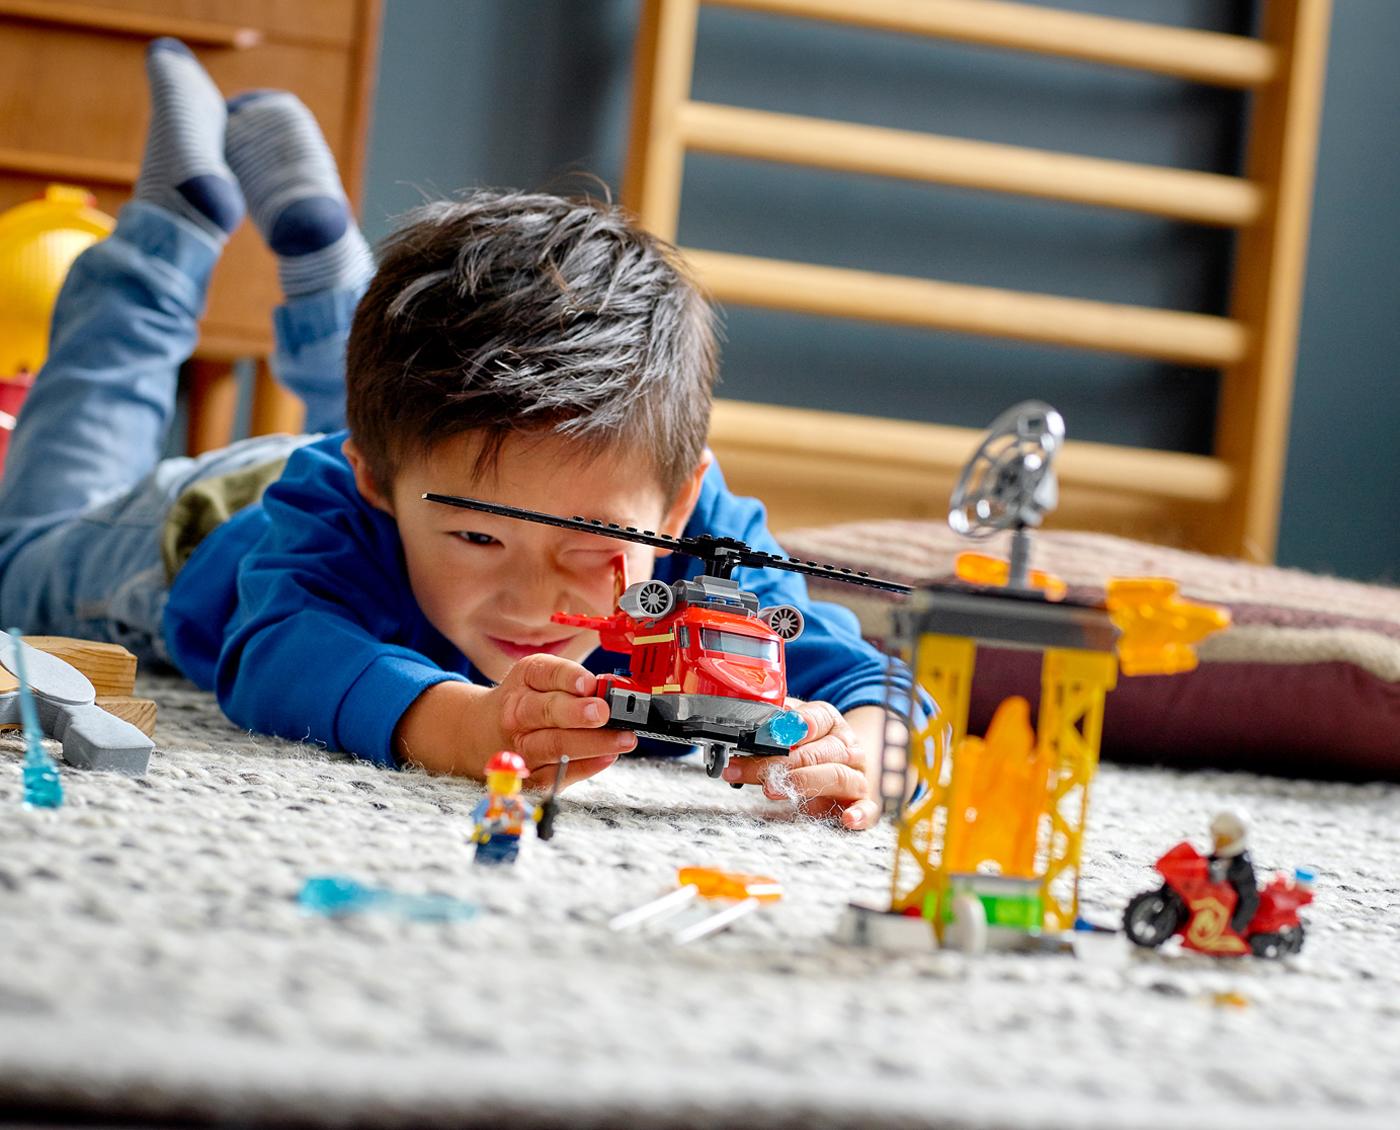 Toys|We specialise in top toy brands such as LEGO, PLAYMOBIL, Schleich and Many More!|SHOP NOW